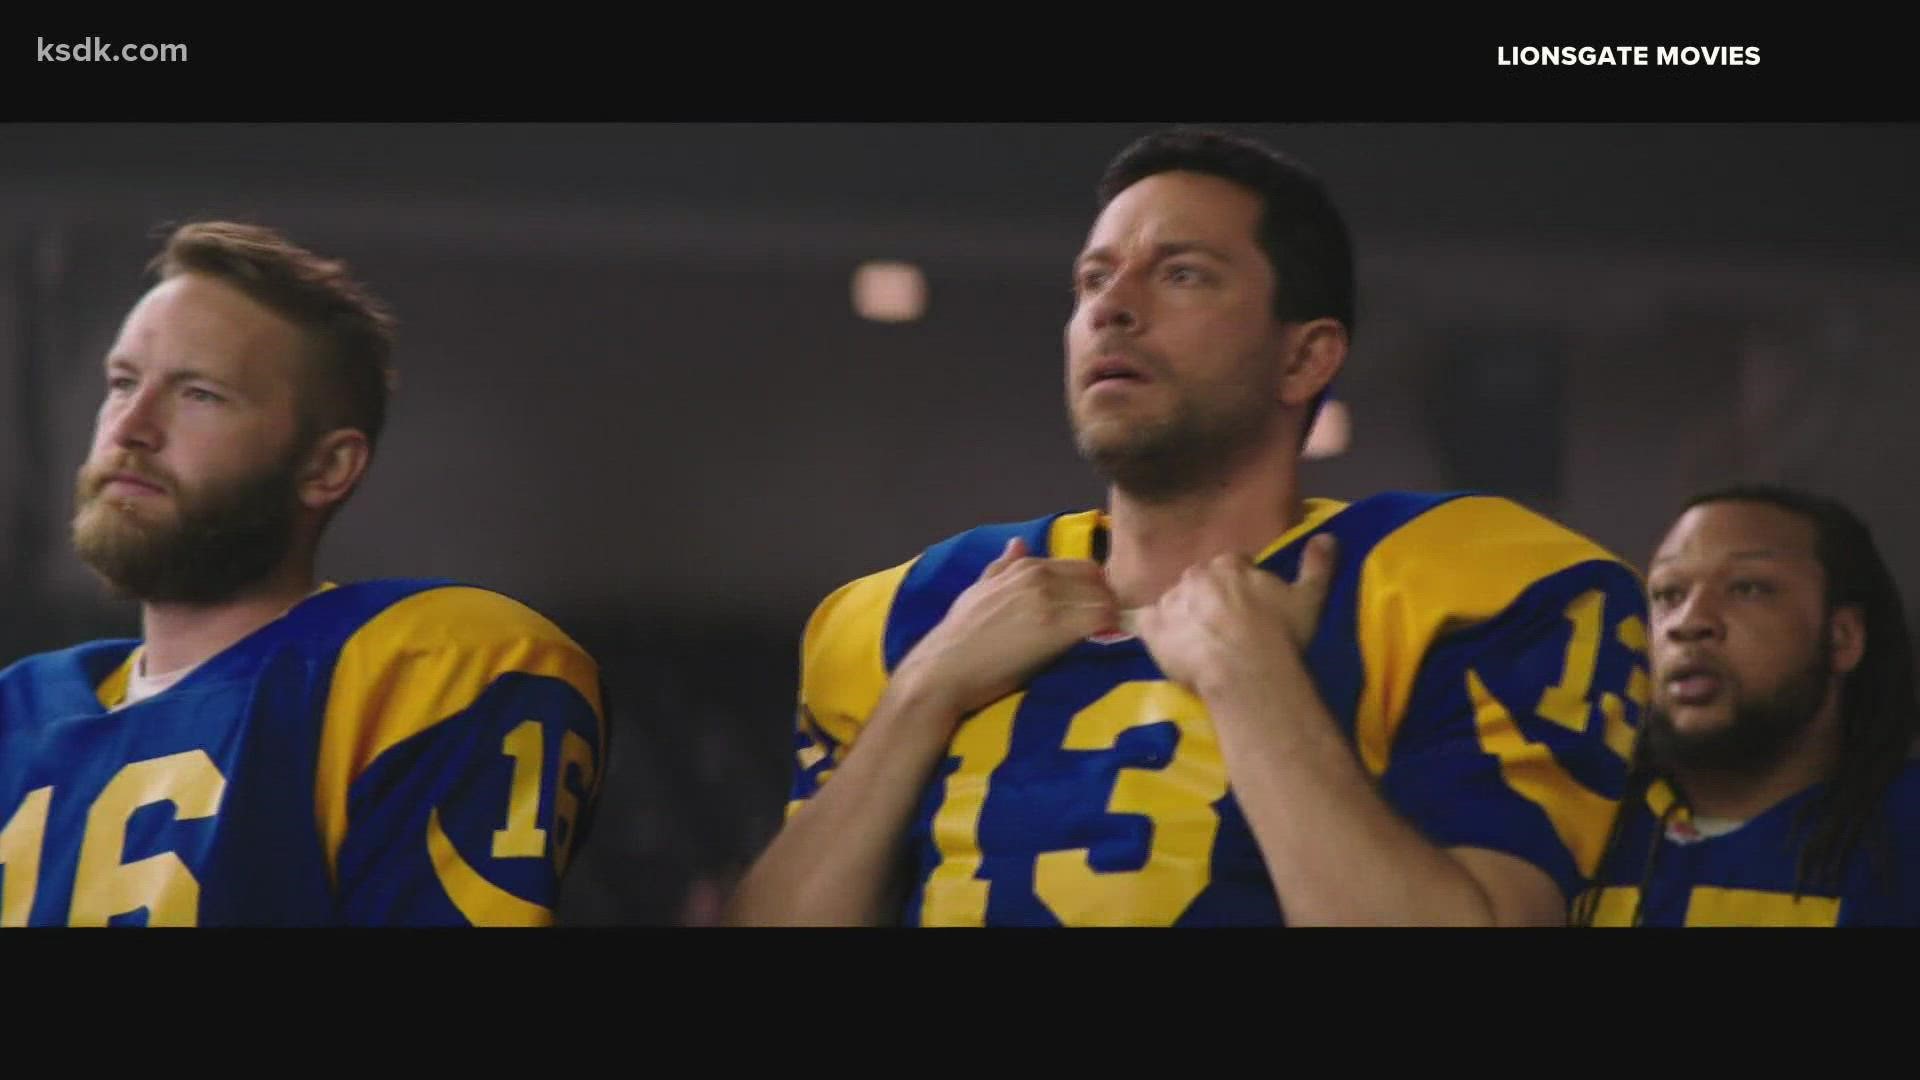 Kurt Warner's story comes to the big screen on Christmas Day, and the first trailer gives a look at Zachary Levi's portrayal of the St. Louis Rams legend